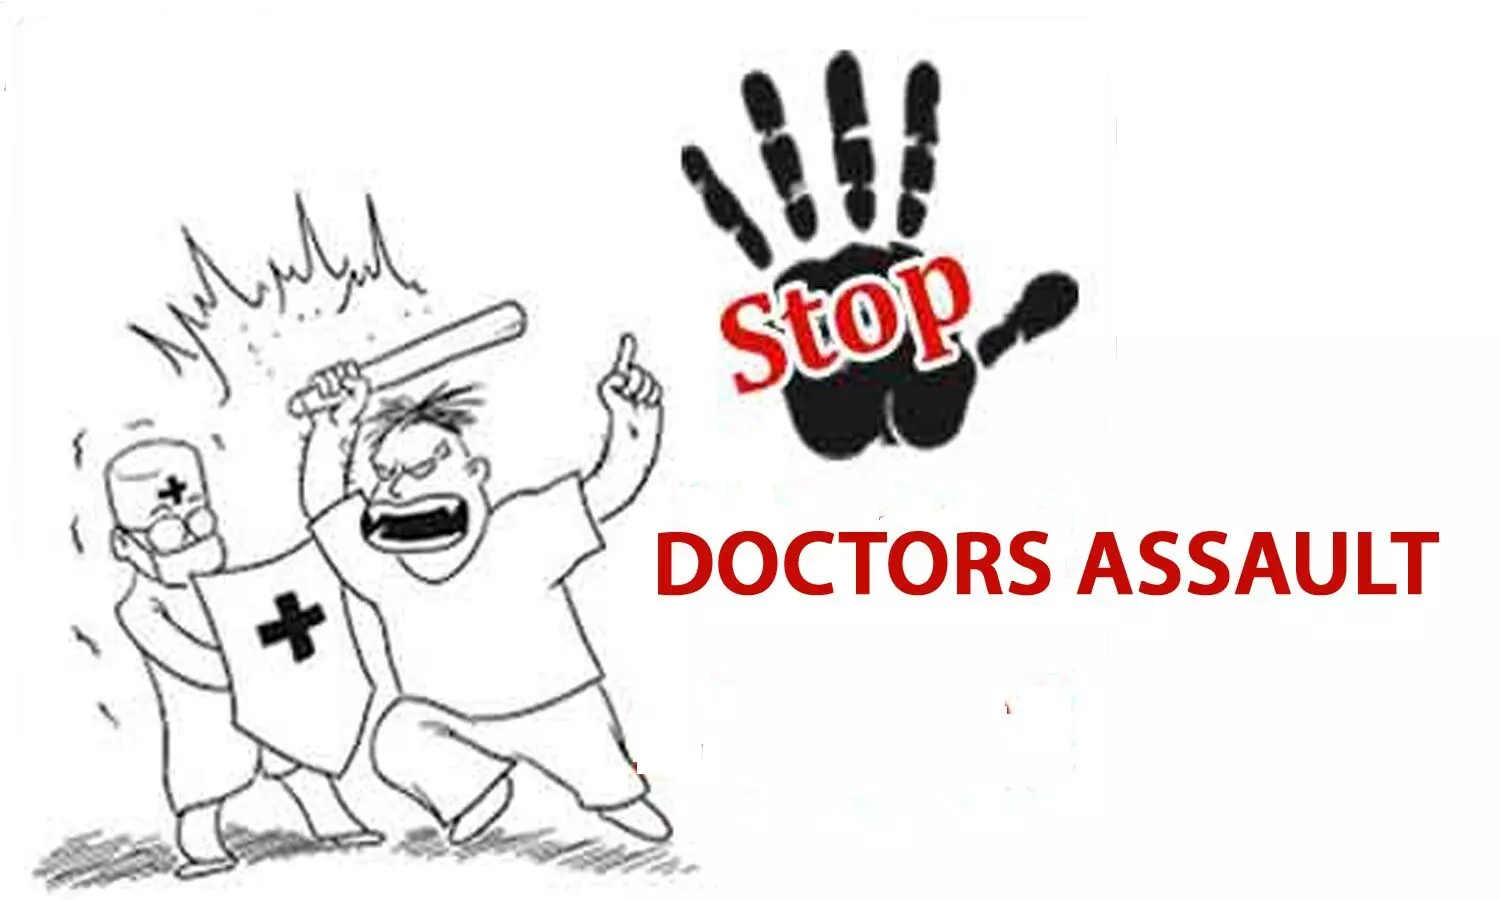 Delhi Shocker: Resident Doctors at COVID-19 only LNJP Hospital assaulted, guards stay away for want of PPE